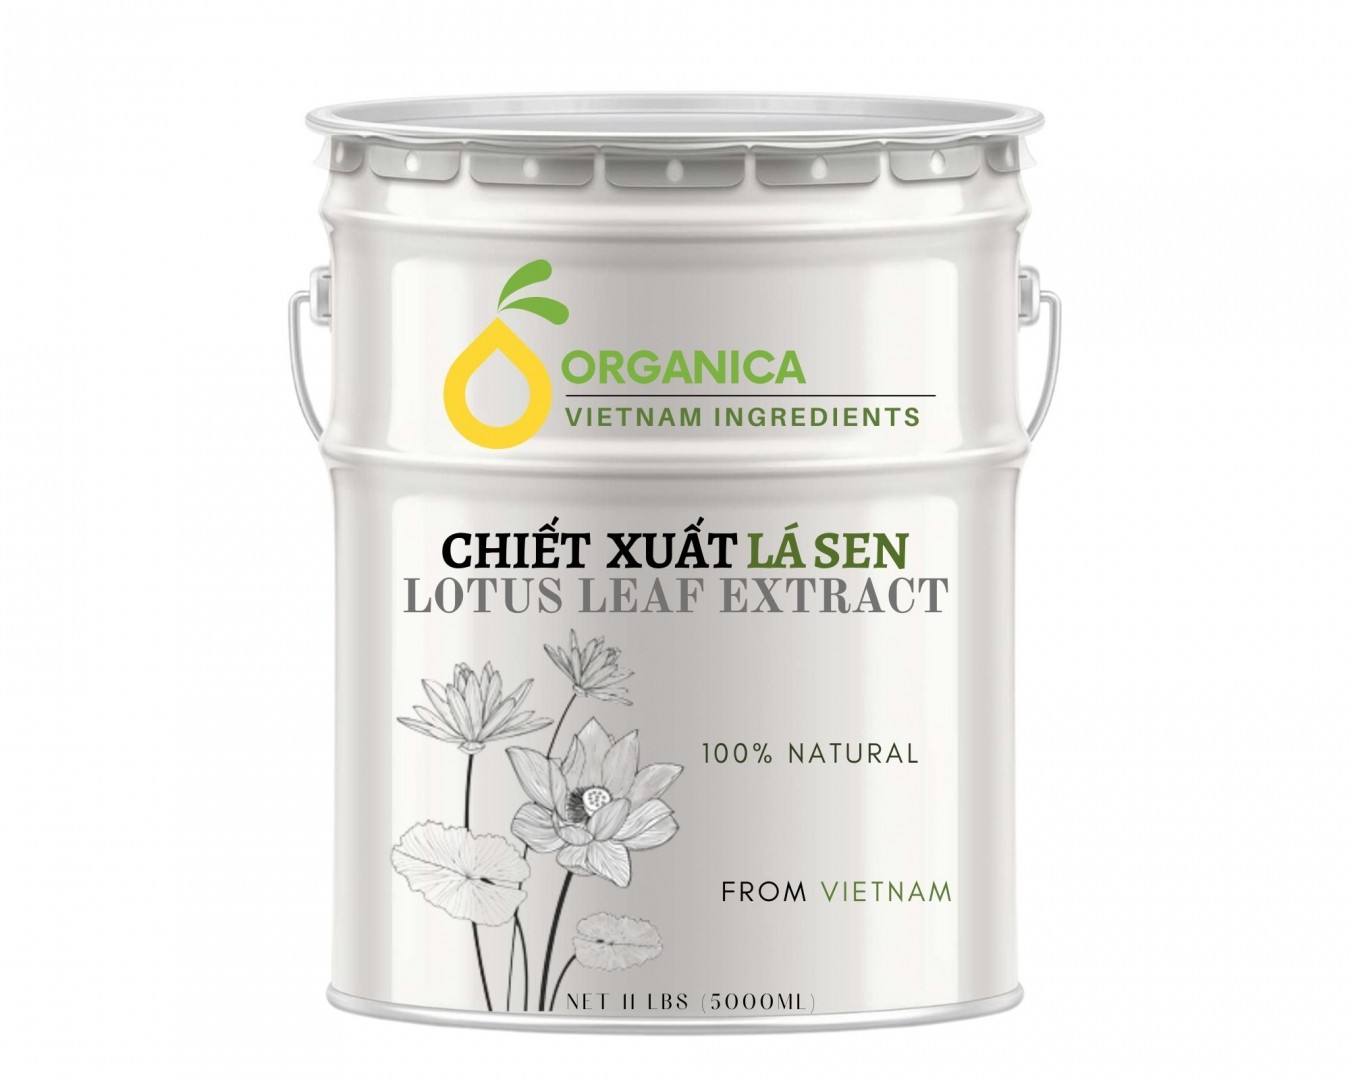 Chiết xuất lá sen (Lotus leaf extract)